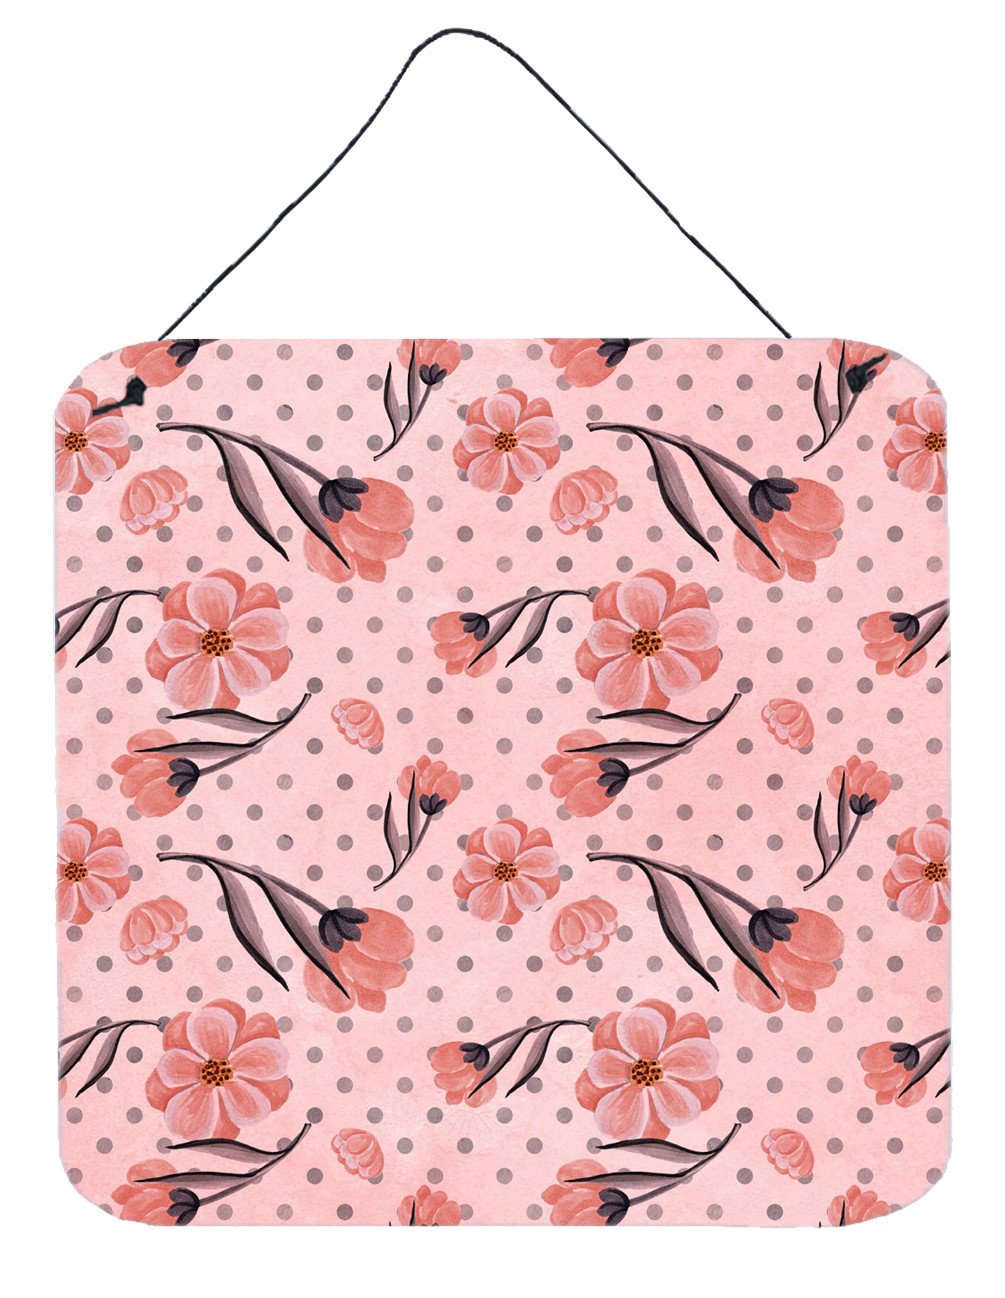 Pink Flowers and Polka Dots Wall or Door Hanging Prints BB7499DS66 by Caroline's Treasures